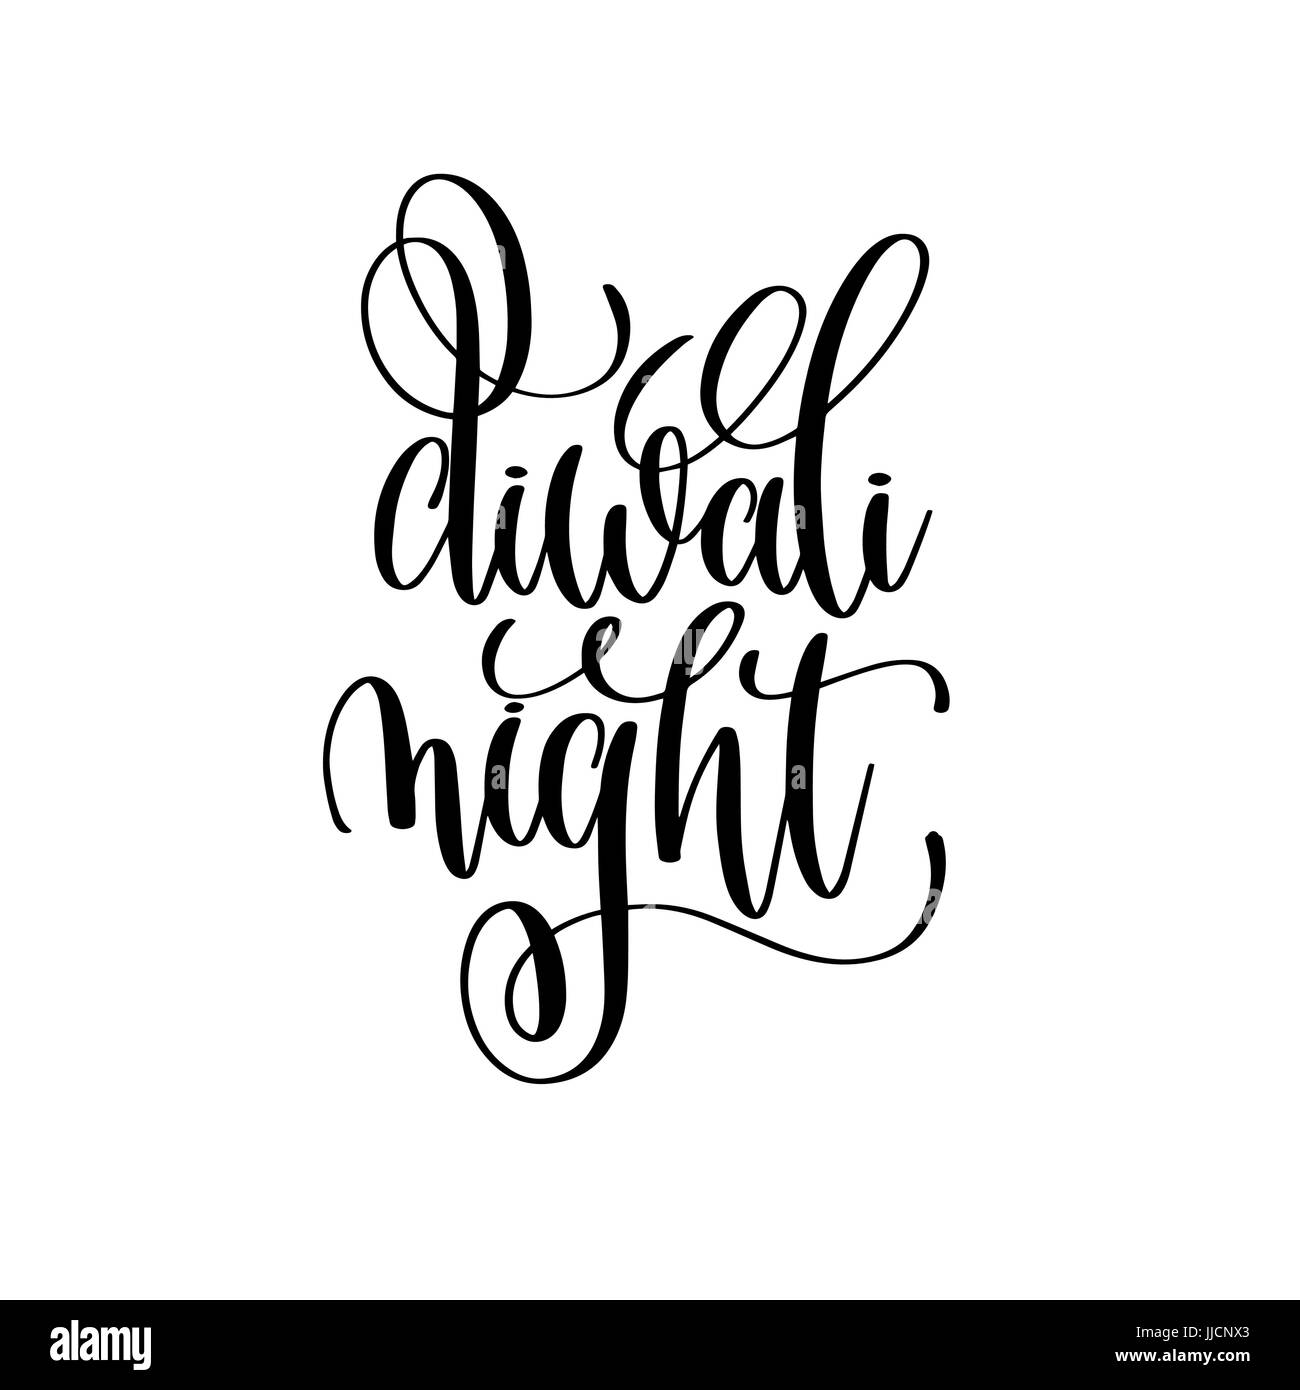 diwali night black calligraphy hand lettering text Stock Vector